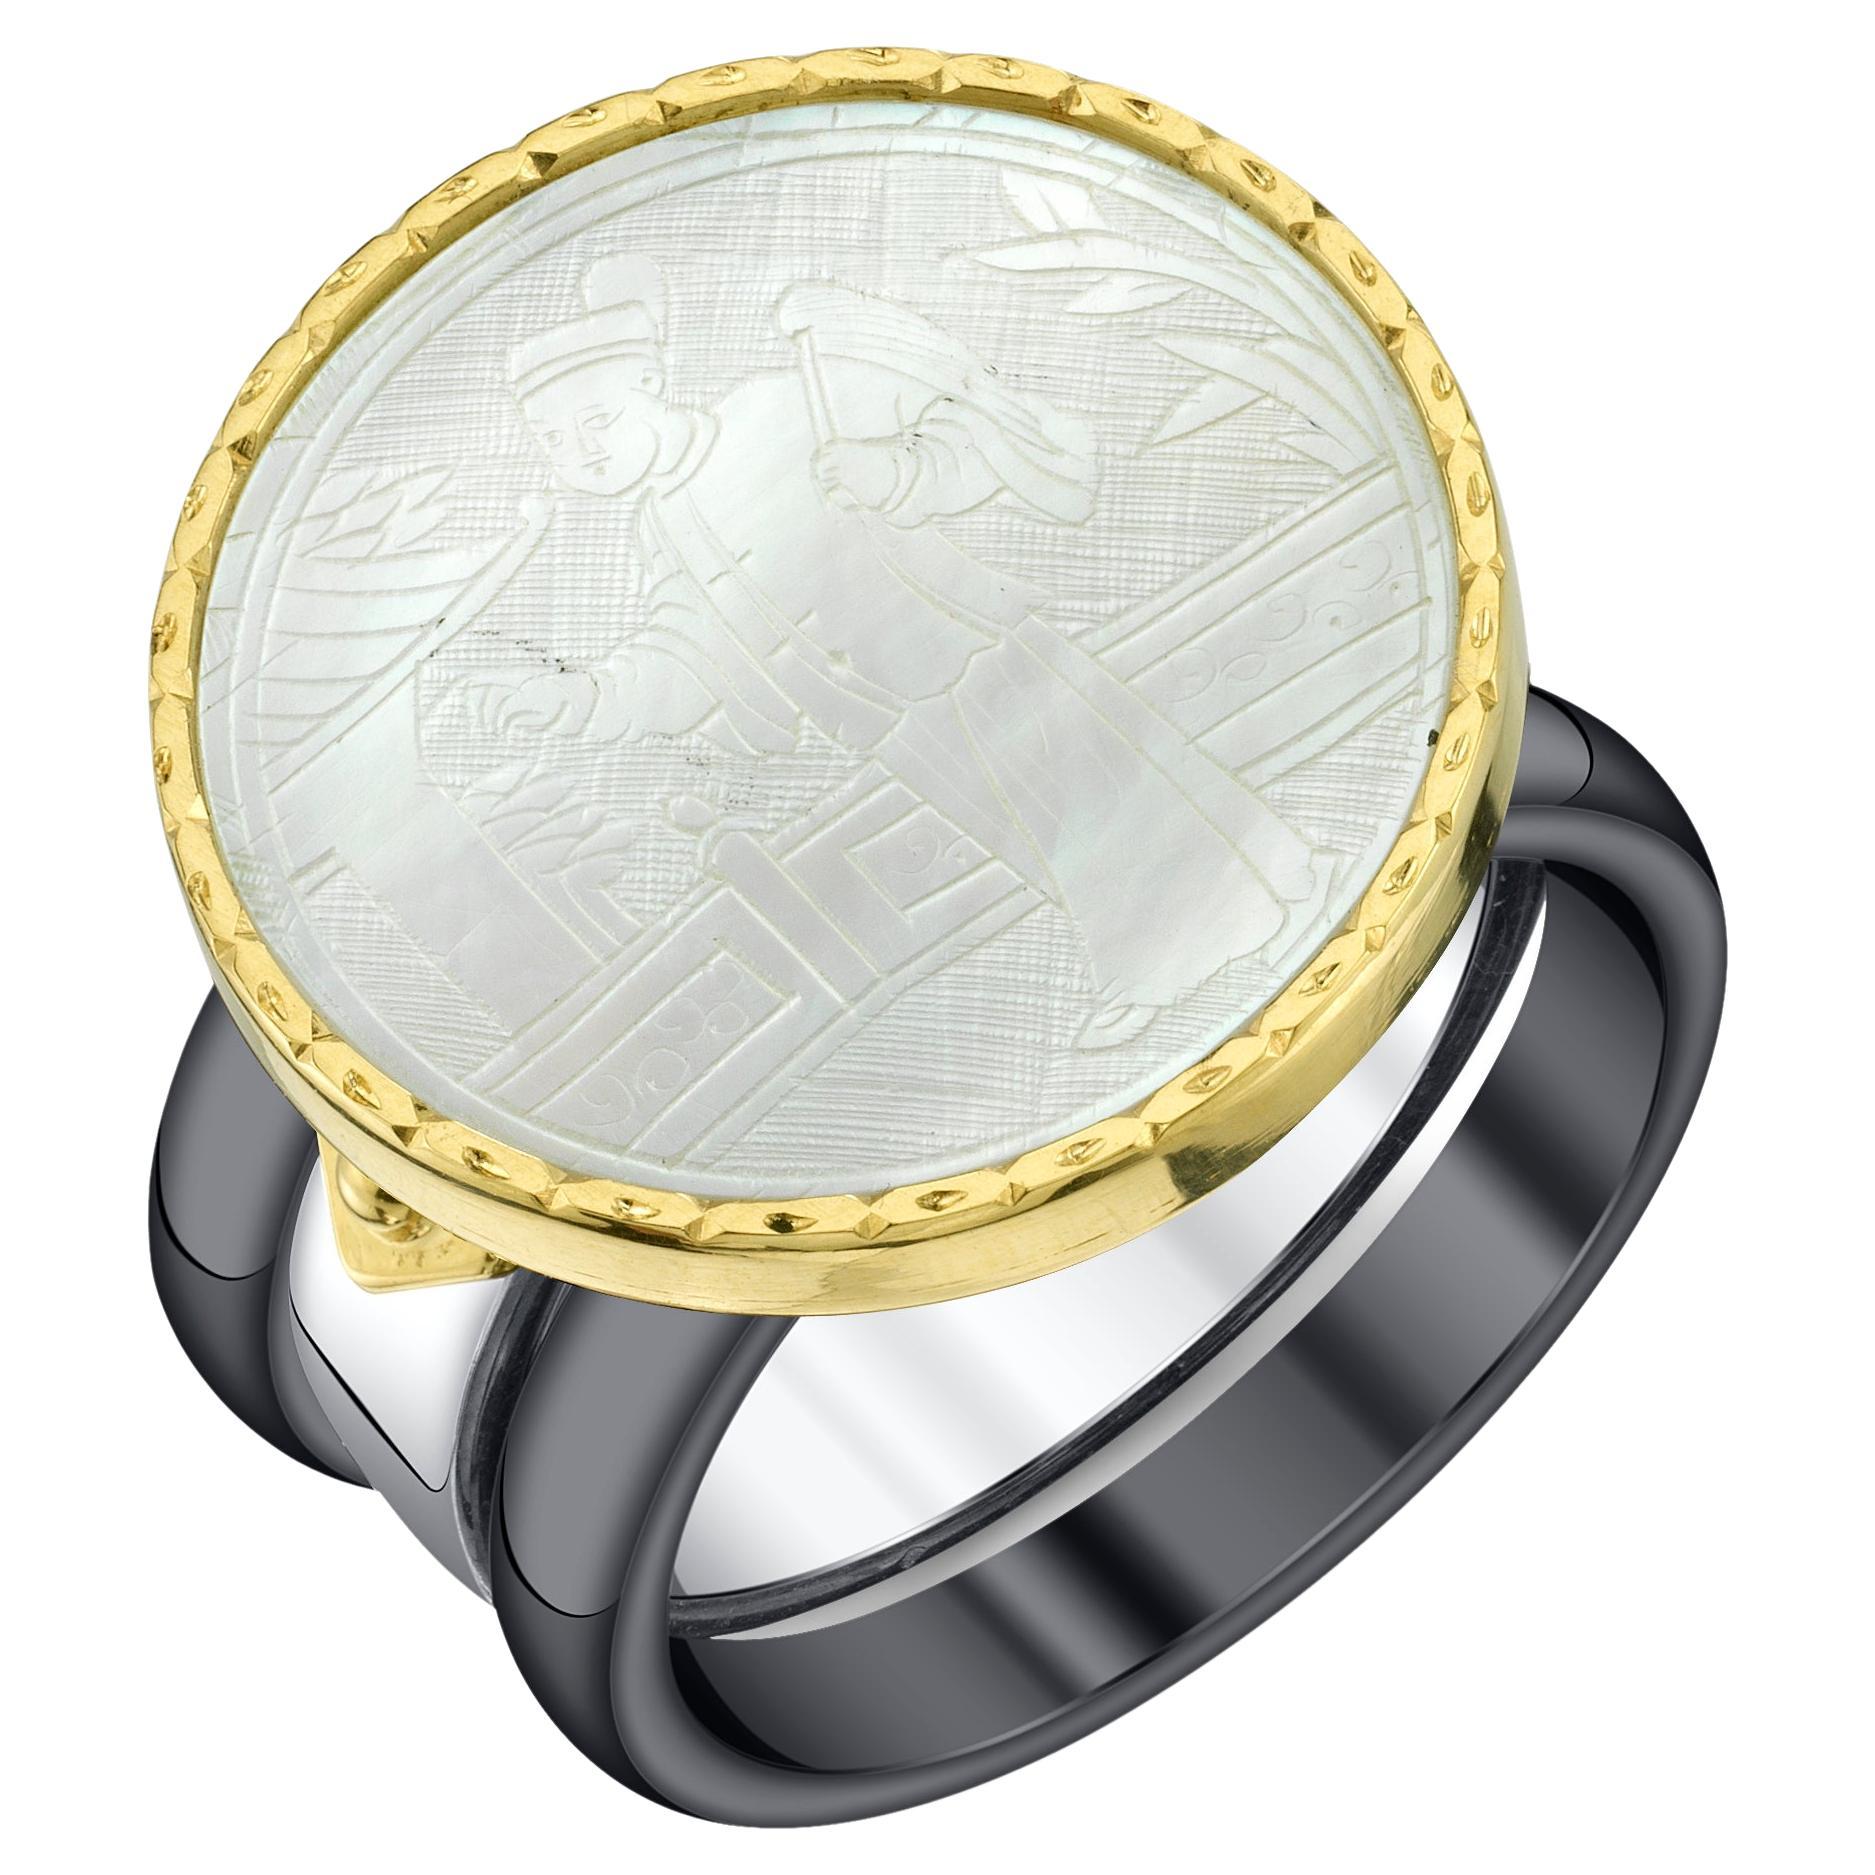 Antique Engraved Mother-of-Pearl Ring in 18k Gold with Removable Ceramic Bands